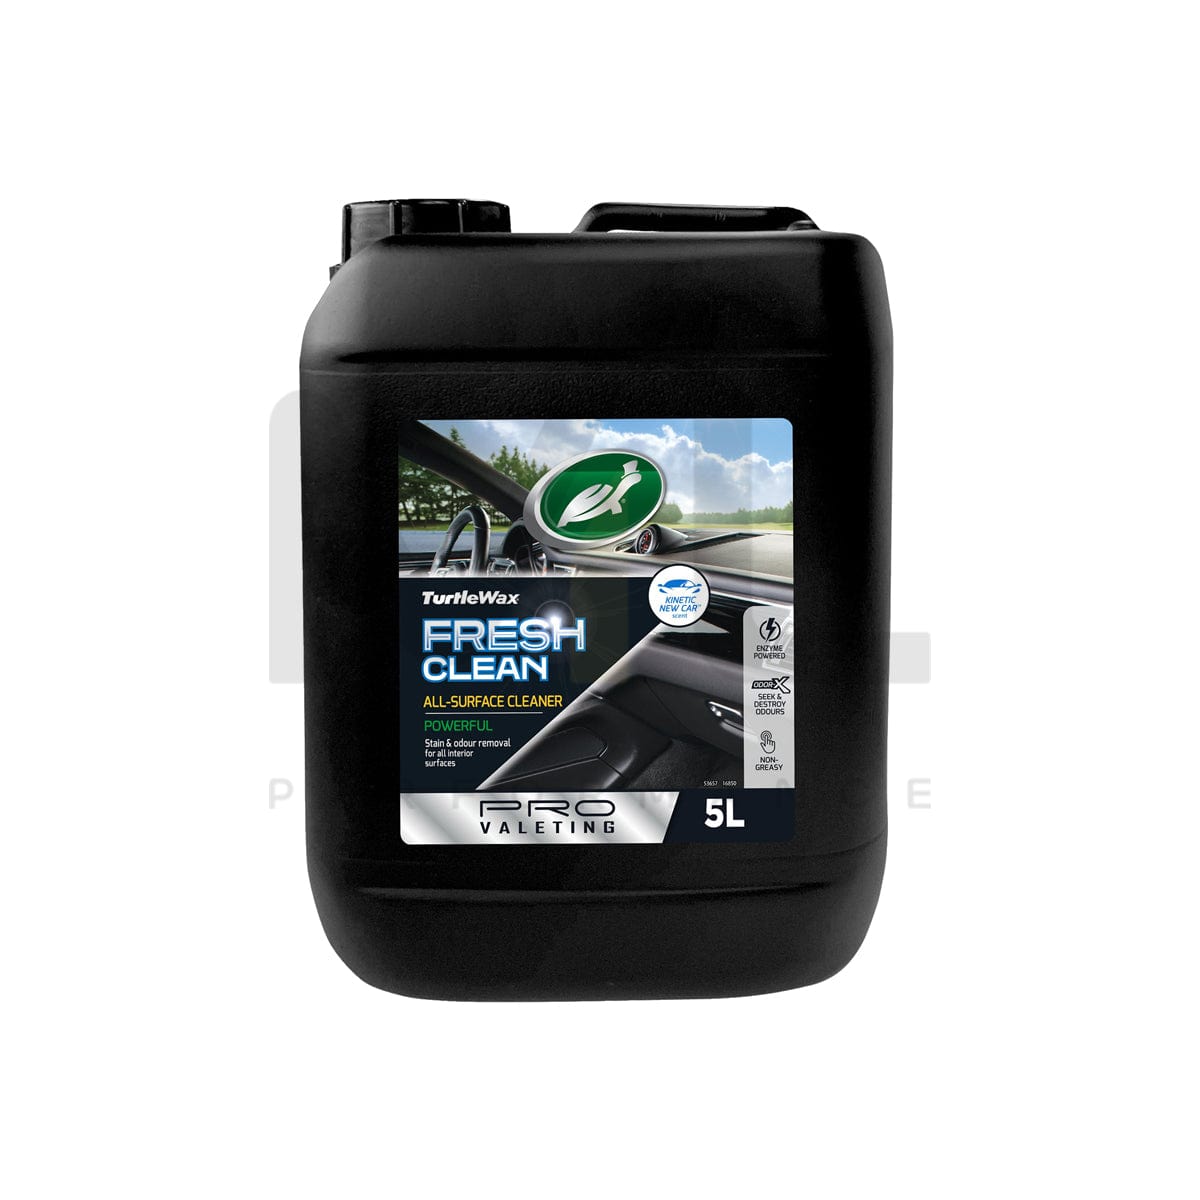 Turtle Wax Fresh Clean Multi-Surface Cleaner 5L